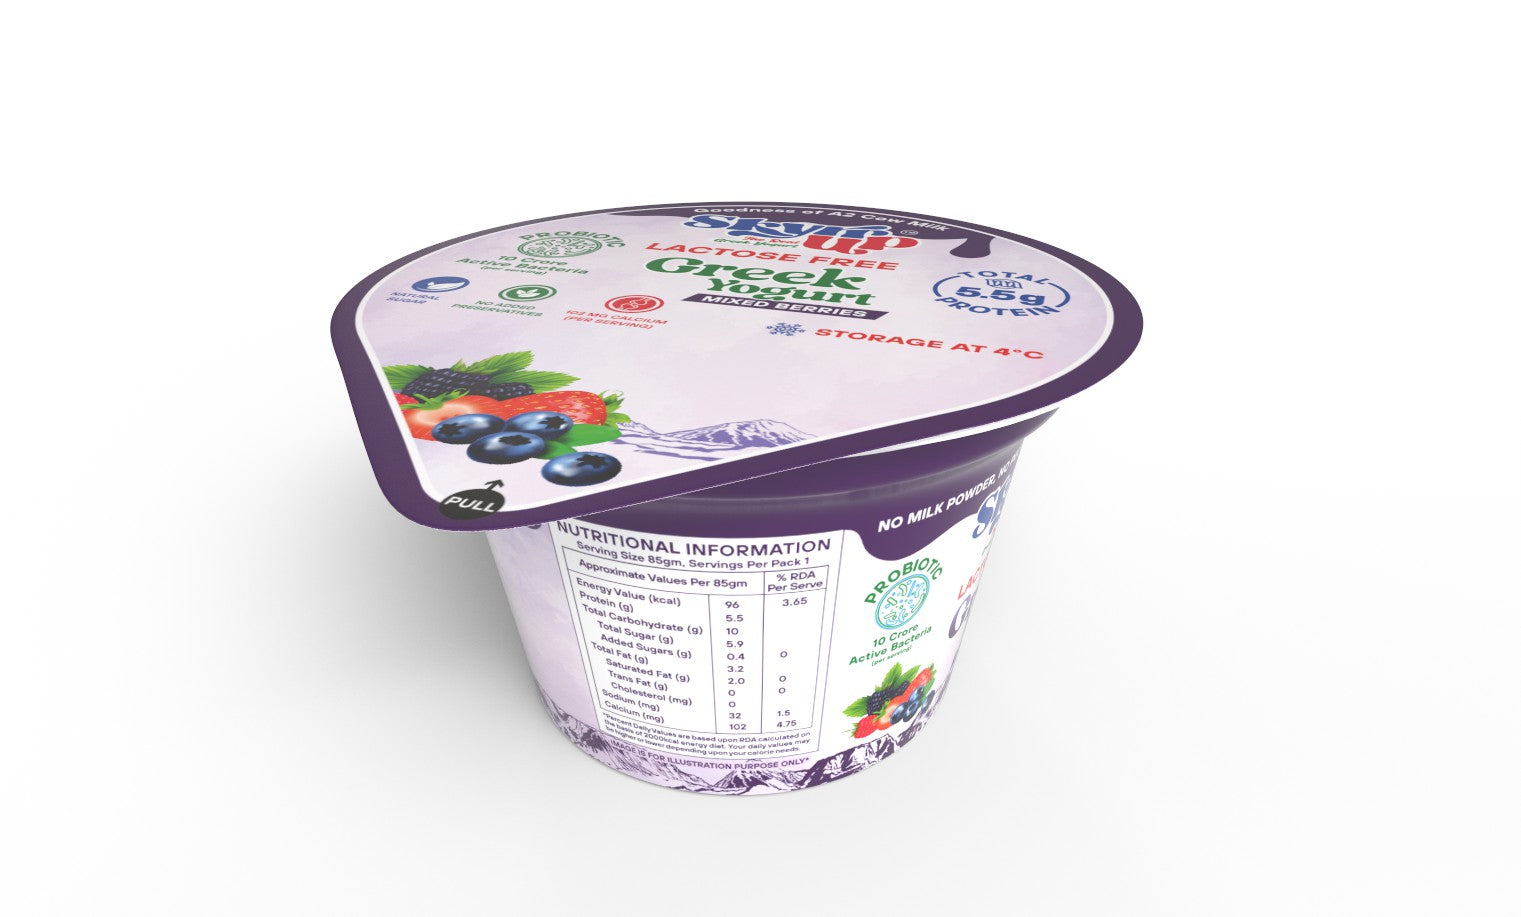 Greek Yogurt - 85gm - Mixed Berries (Made From A2 Cow Milk) - Probiotic, 5.5gm Protein, Zero Preservatives, Lactose Free